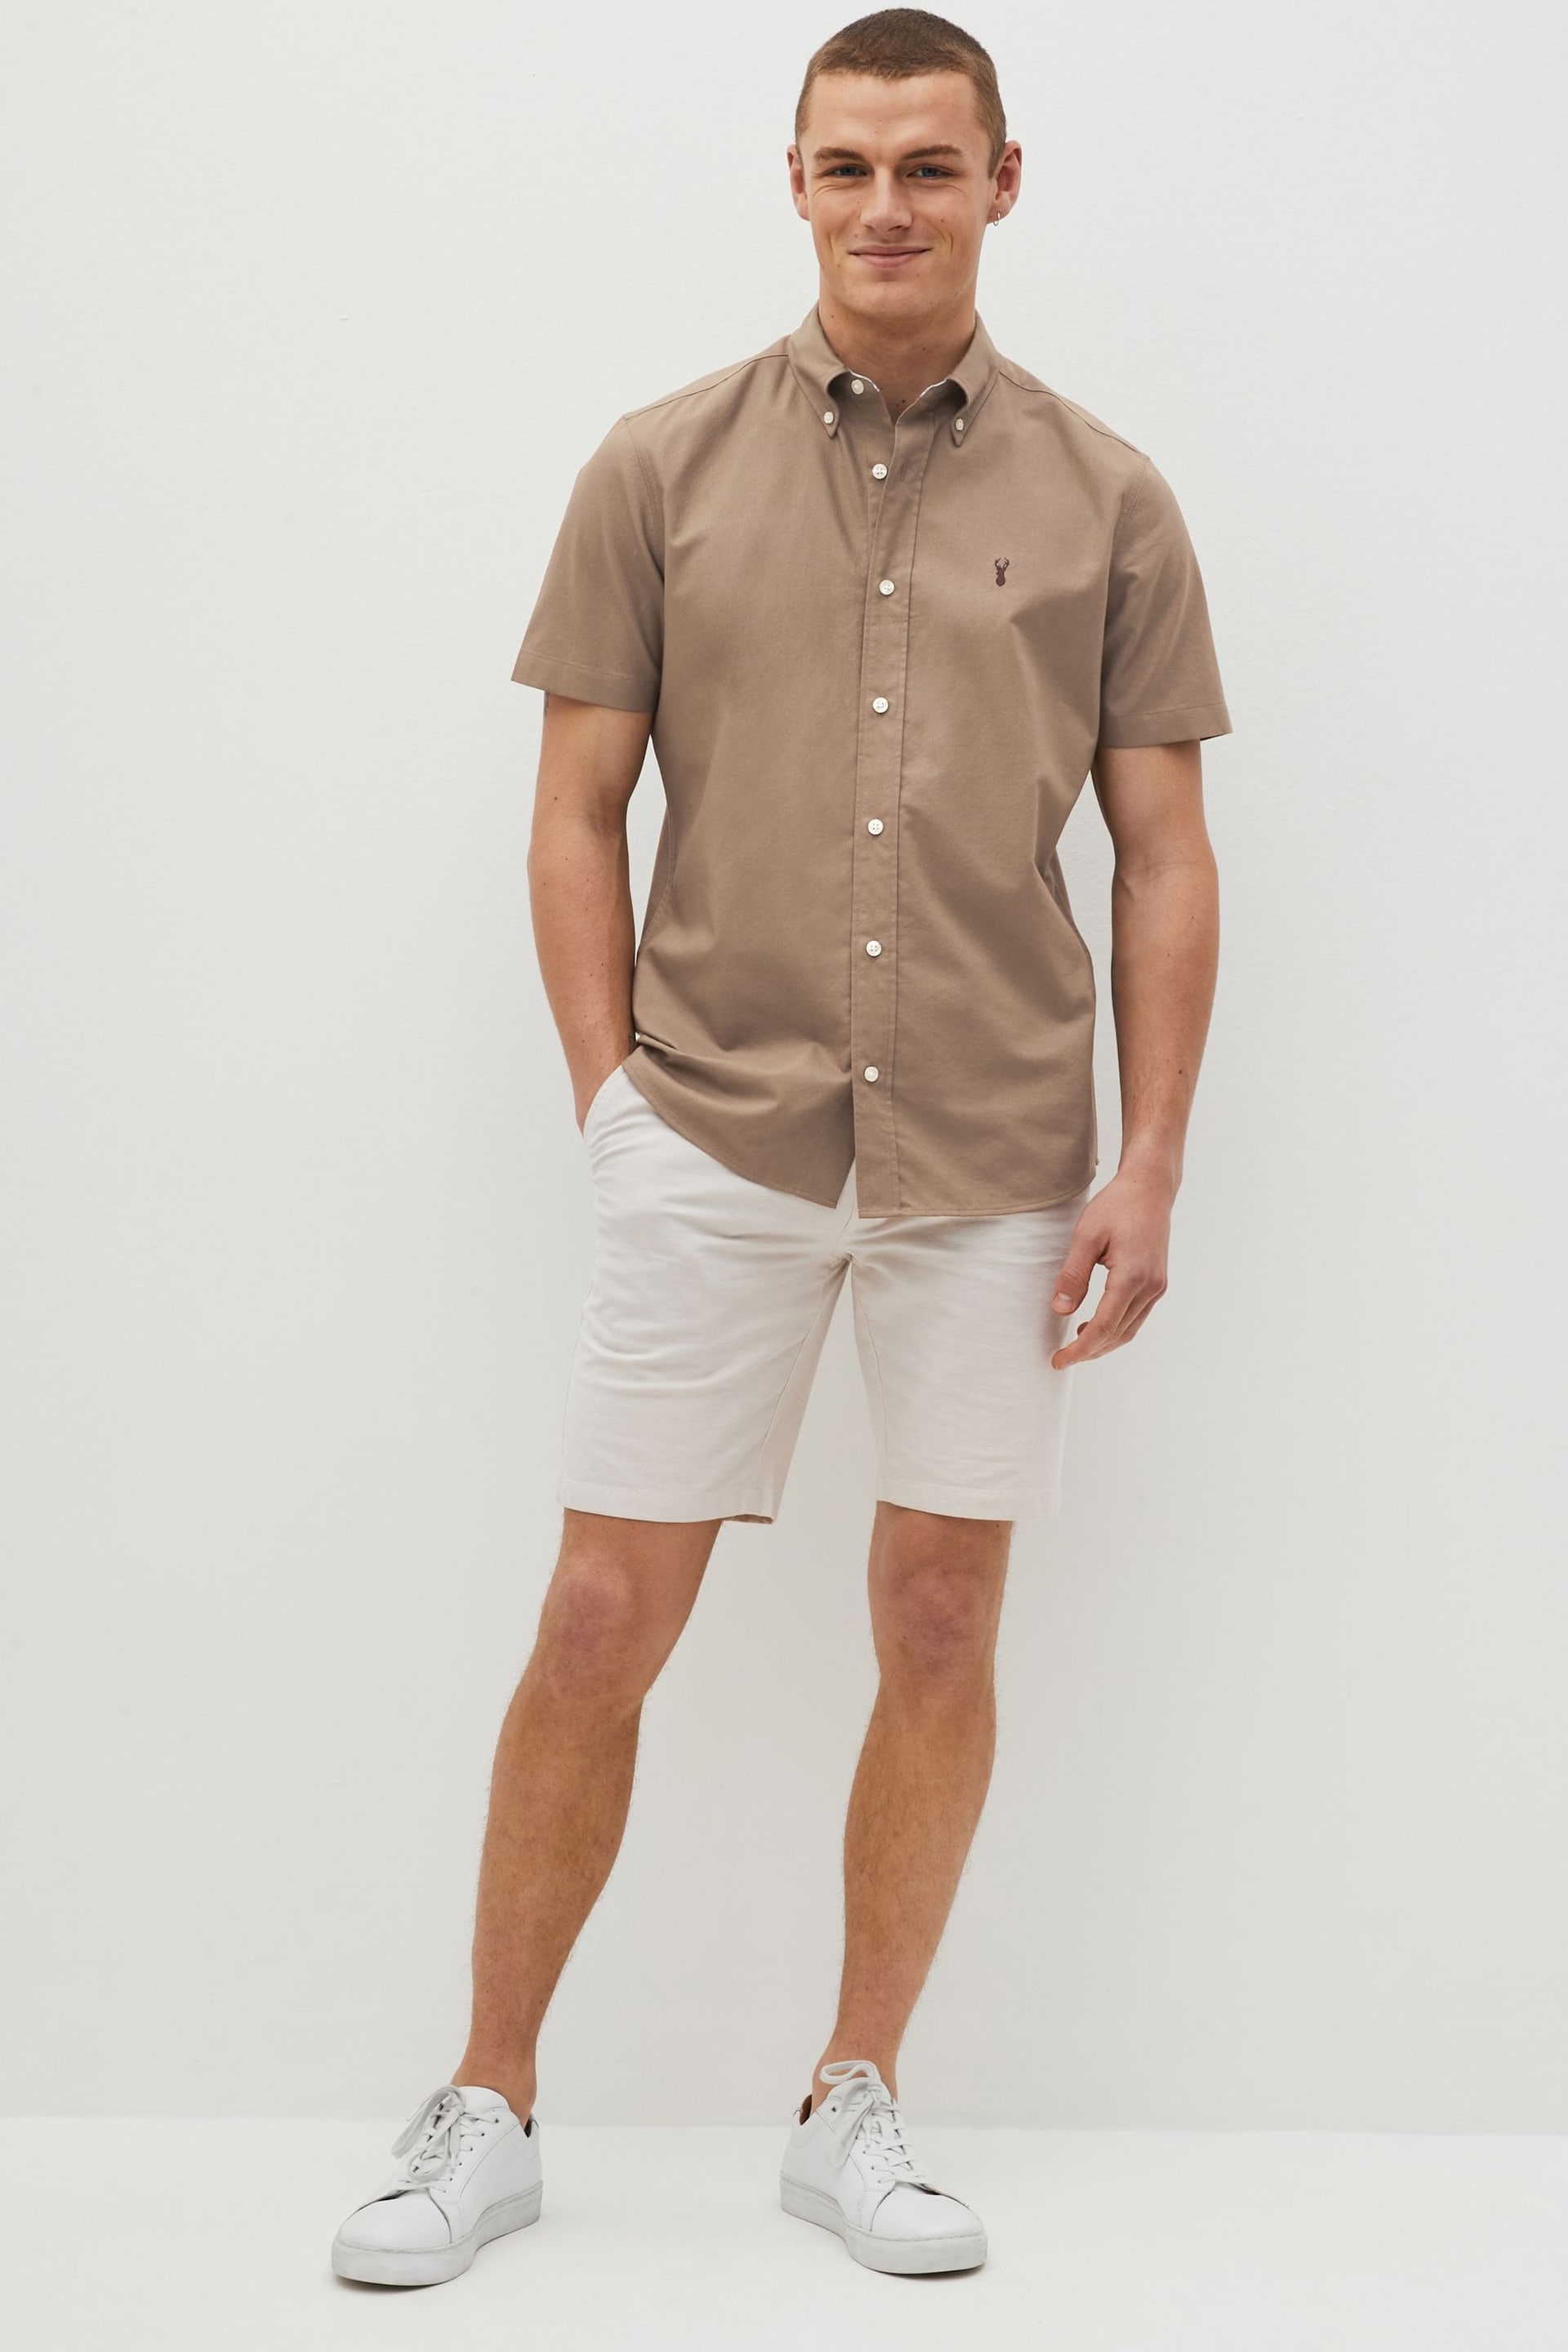 Stone Natural Slim Fit Short Sleeve Oxford Shirt - Image 2 of 6